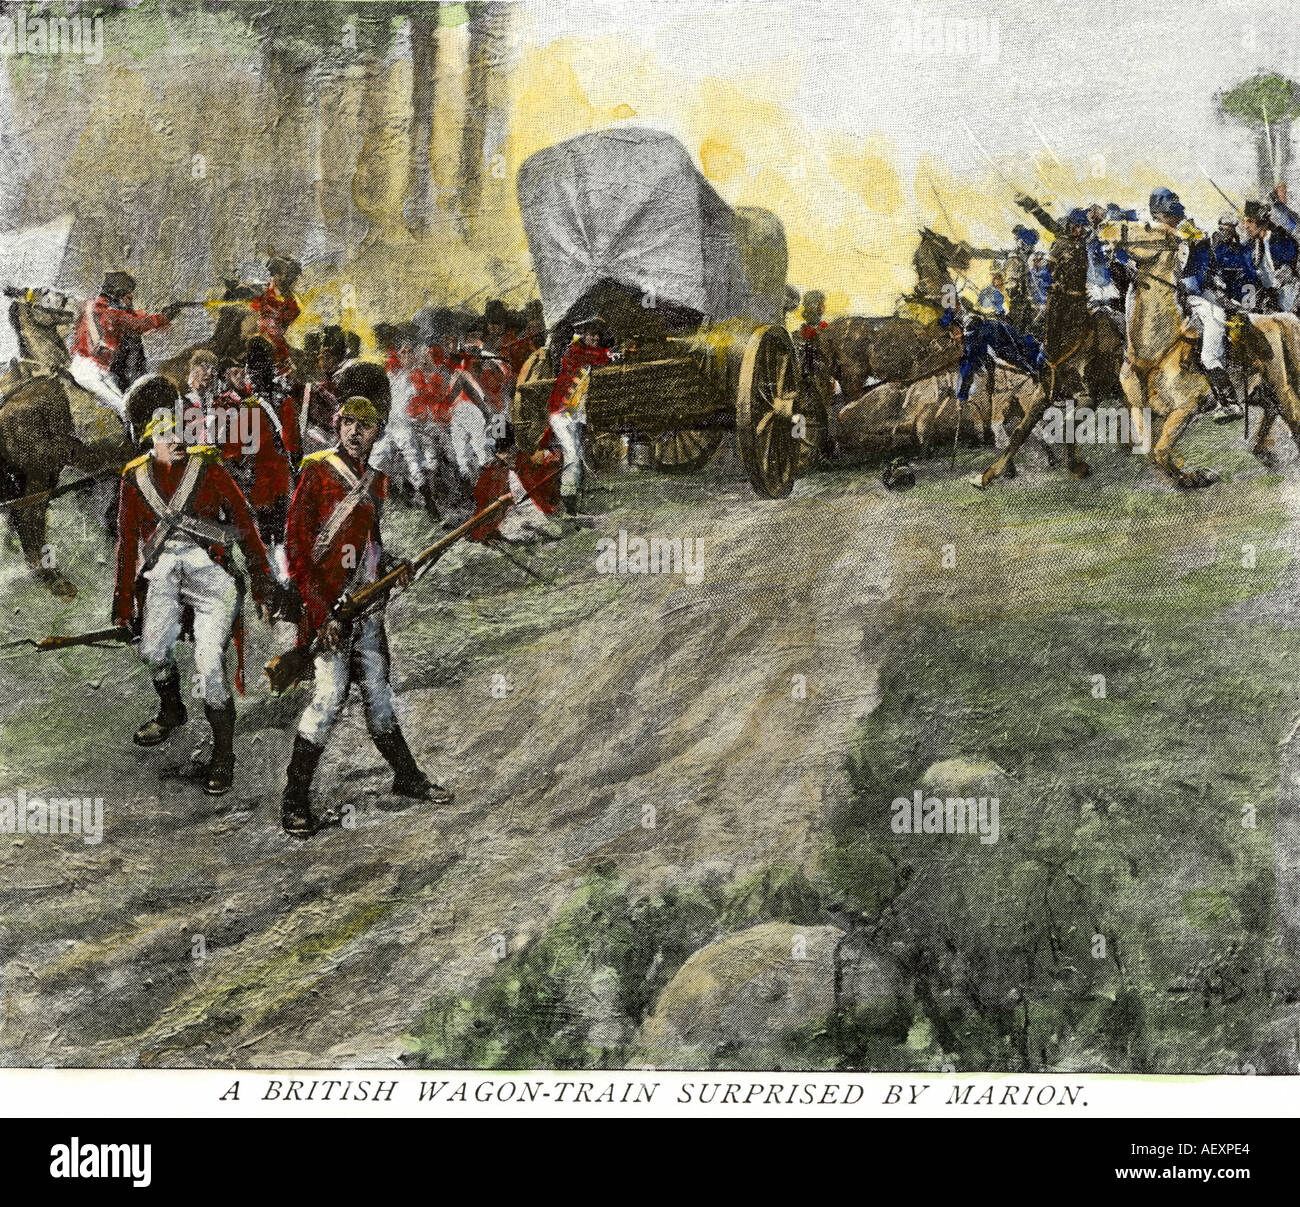 British military wagon train ambushed by Francis Marion in South Carolina during the Revolutionary War. Hand-colored halftone of an illustration Stock Photo